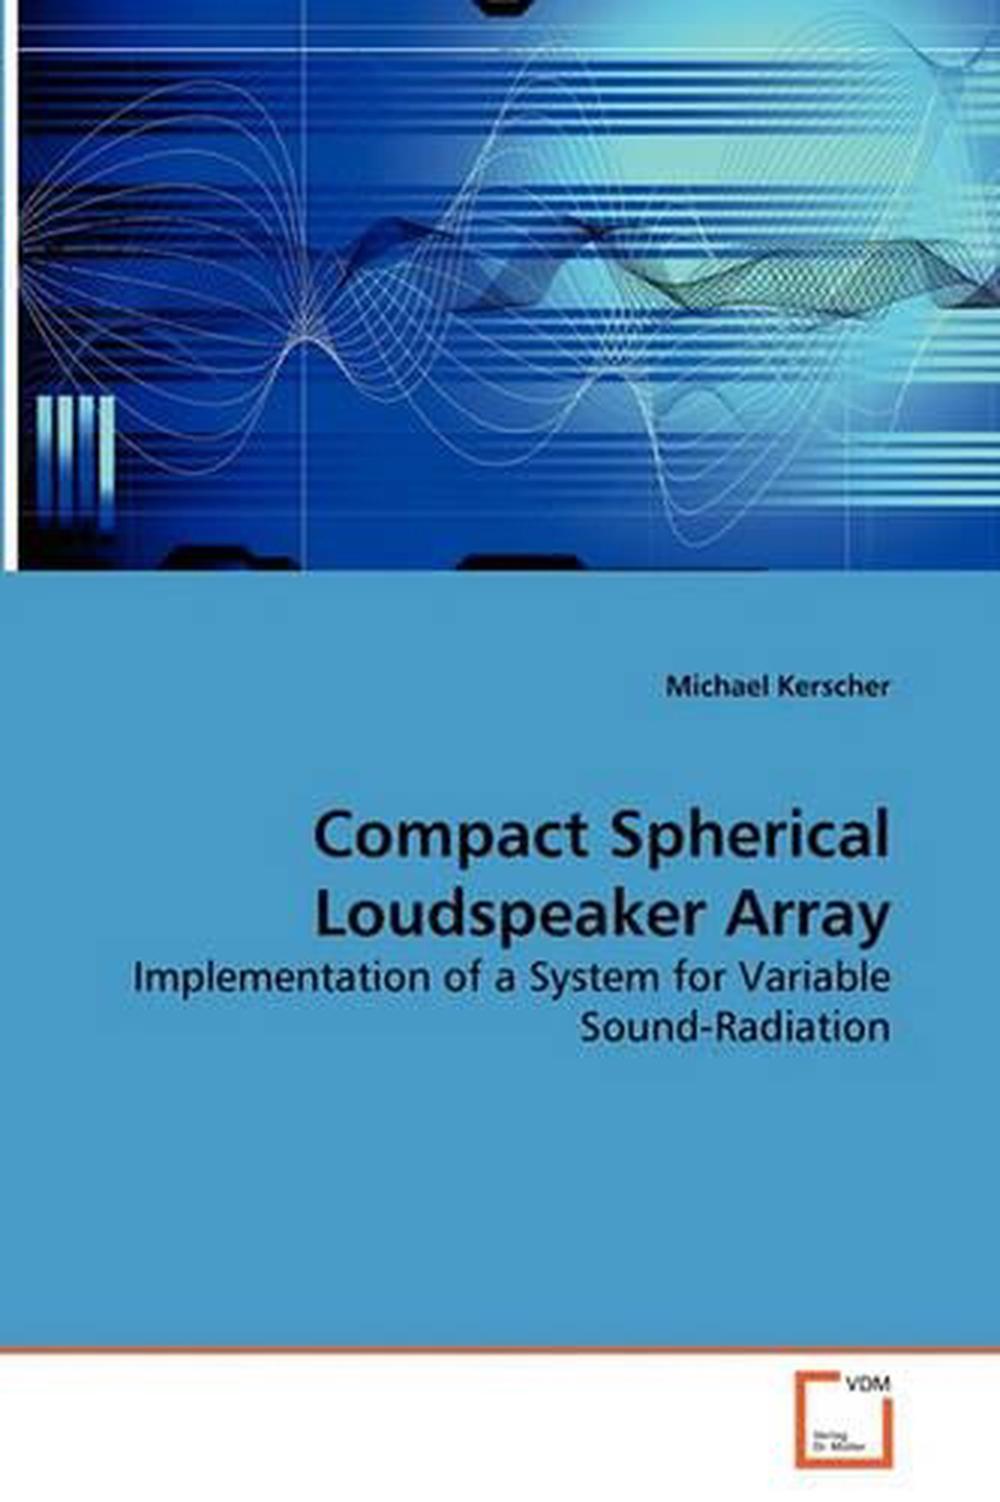 Compact Spherical Loudspeaker Array: Implementation of a System for Variable Sou - 第 1/1 張圖片